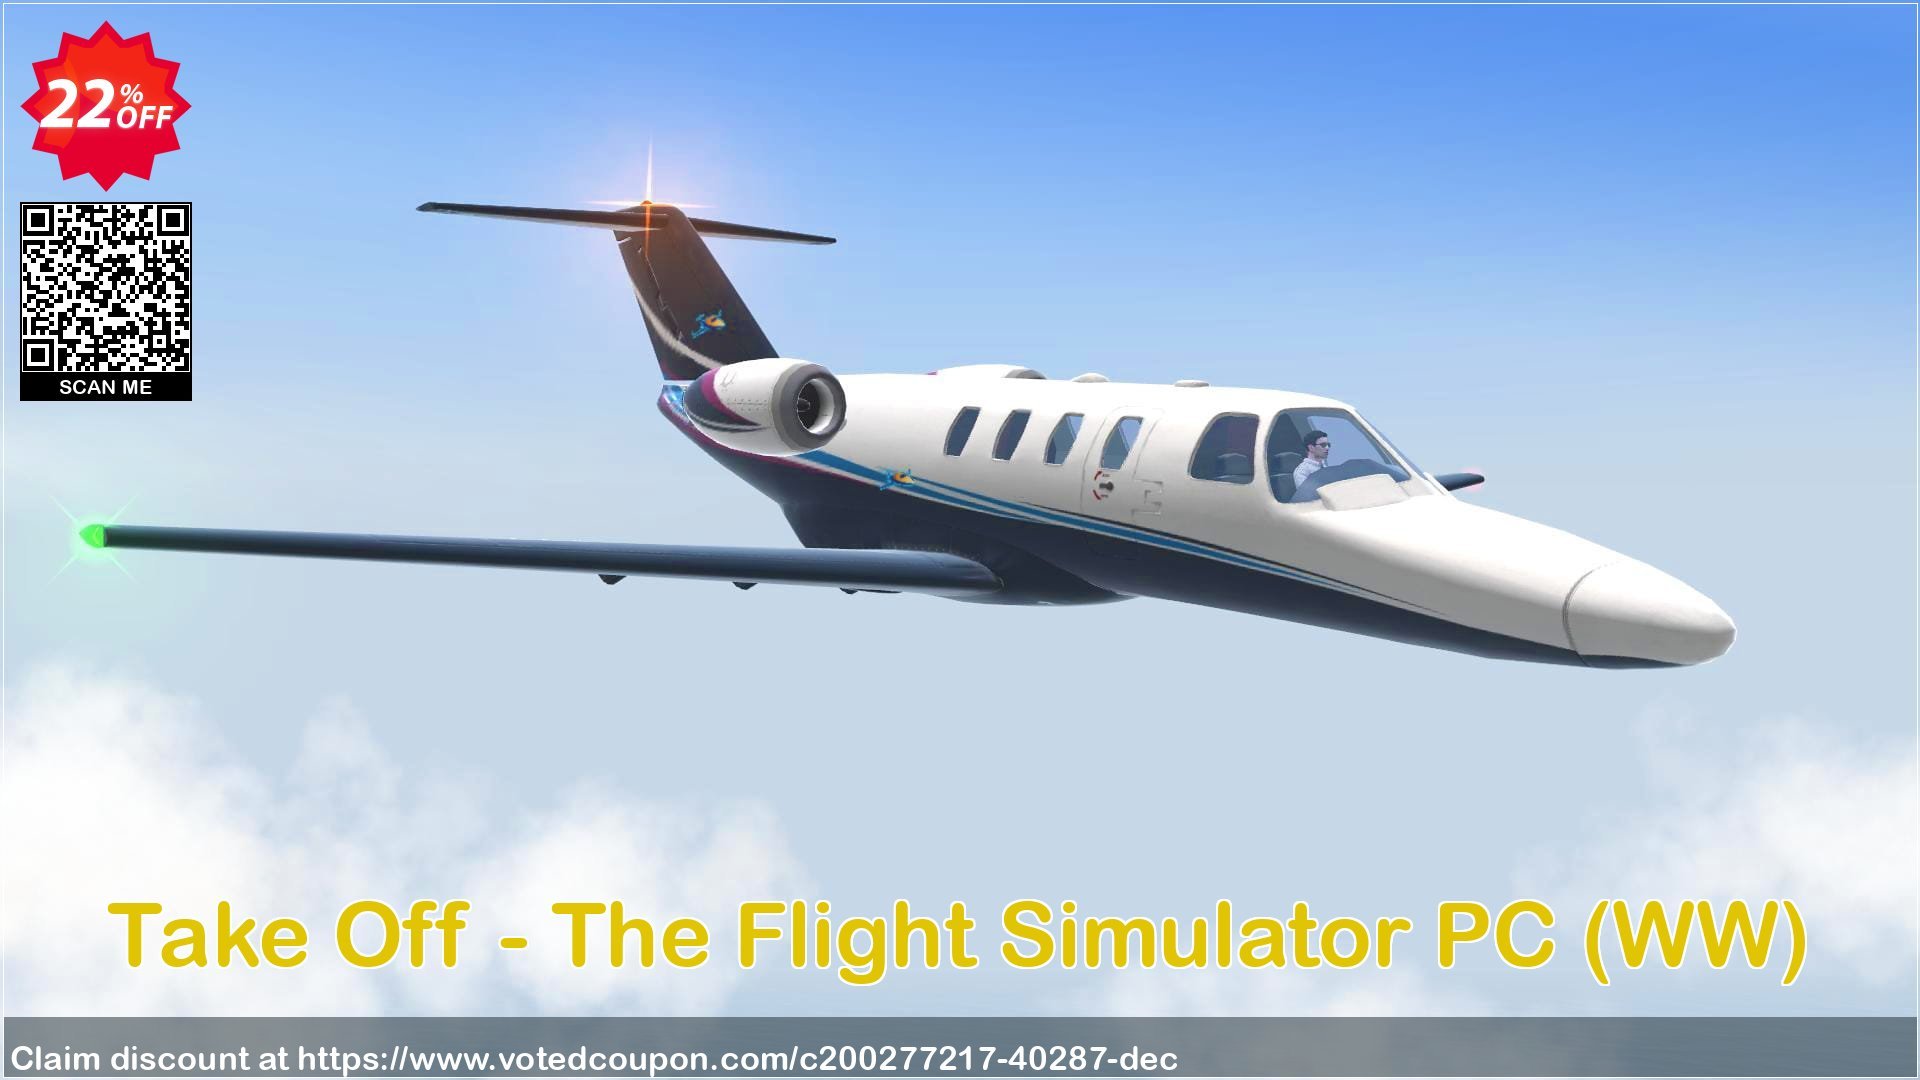 Take Off - The Flight Simulator PC, WW  Coupon Code May 2024, 22% OFF - VotedCoupon